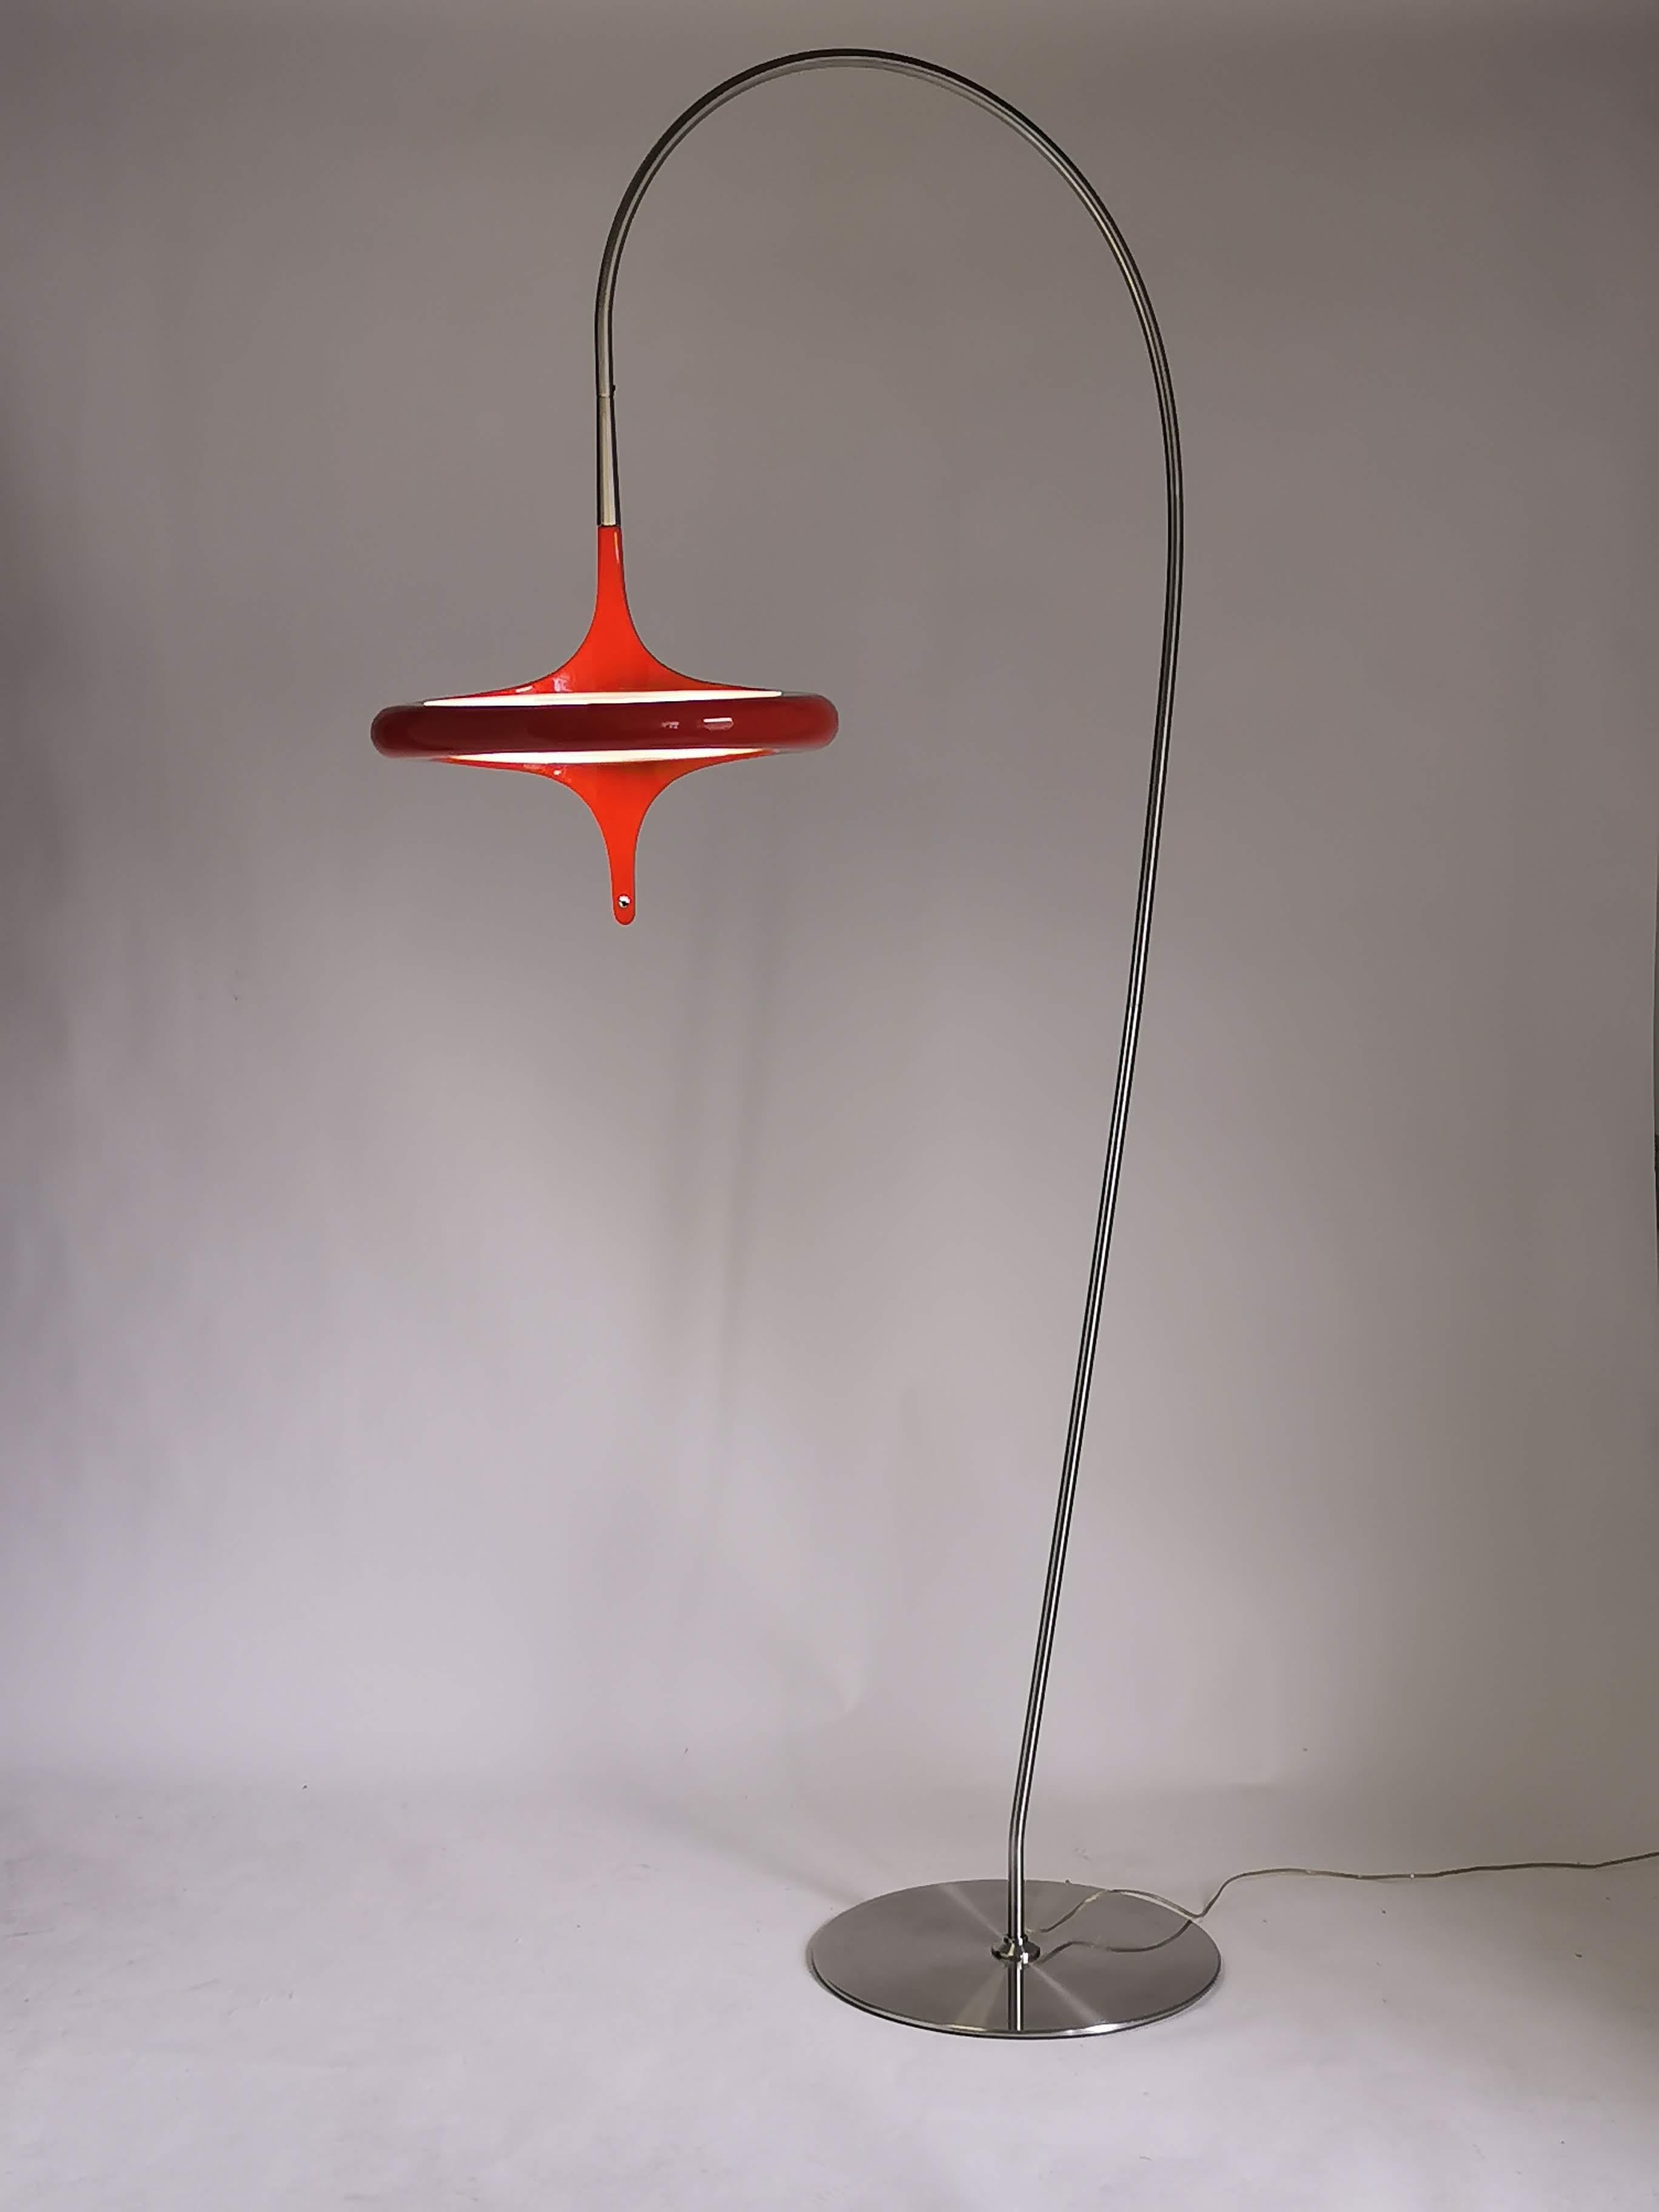 1980s Extra Tall Italian Floor Lamp Odue Astralis  by Quaia, Italy For Sale 8